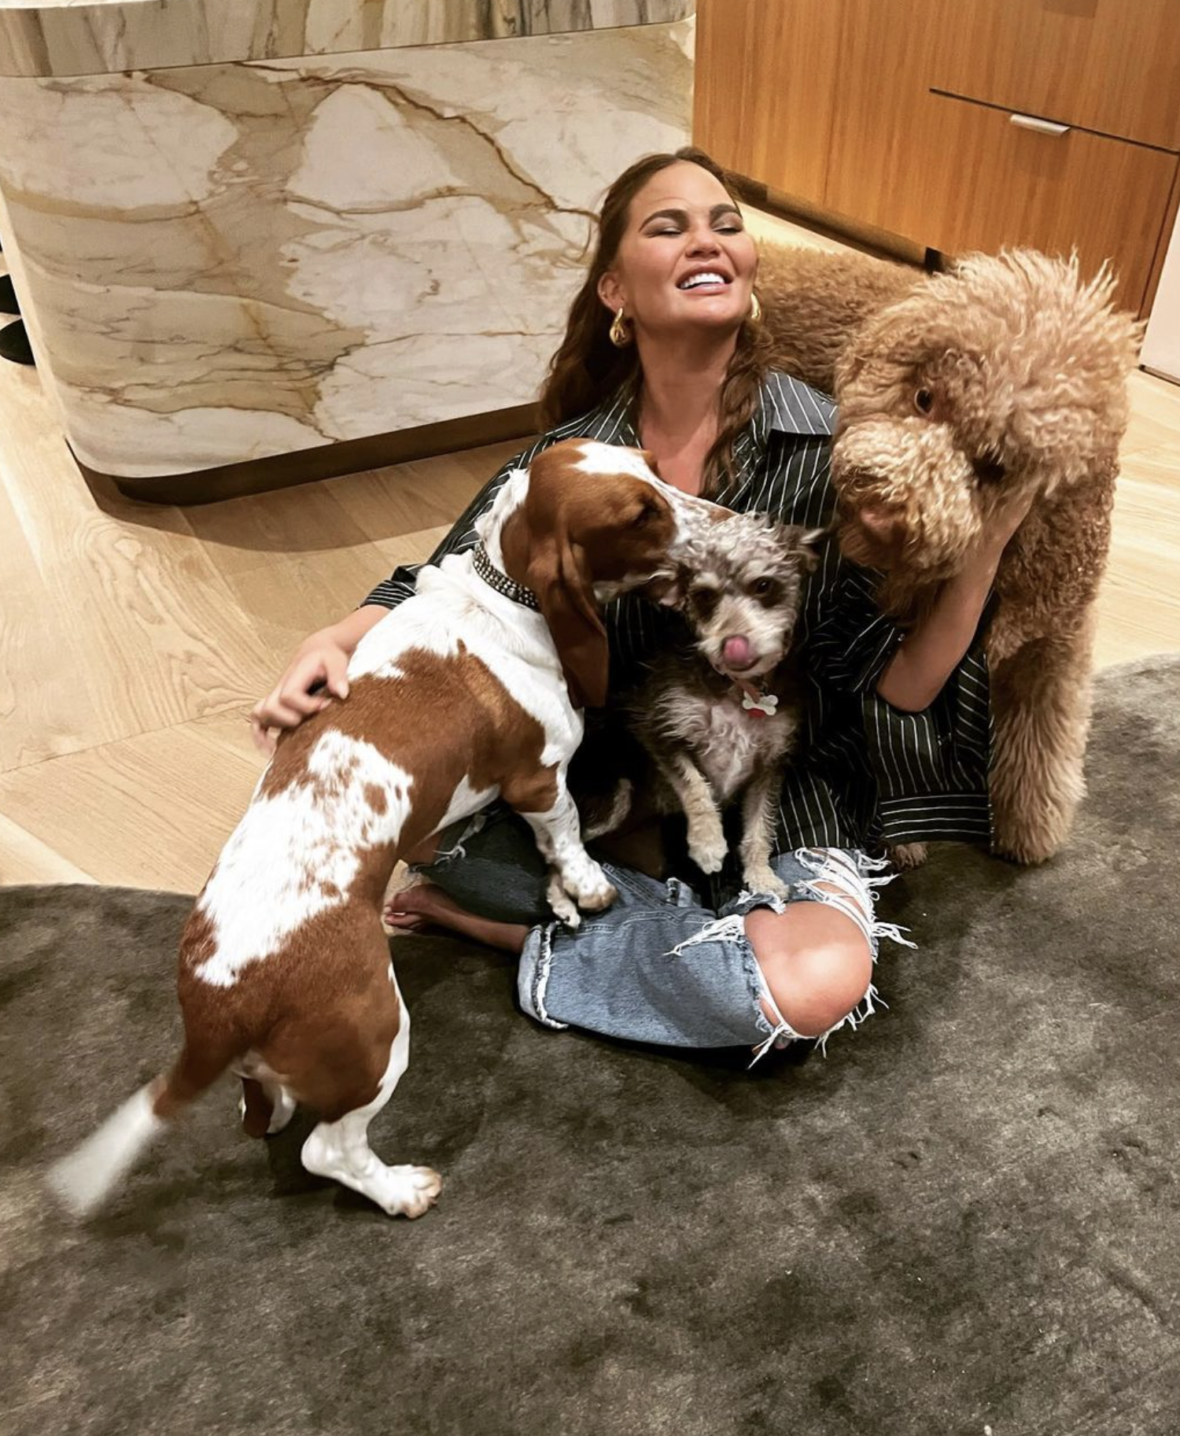 Chrissy Teigen and her dogs